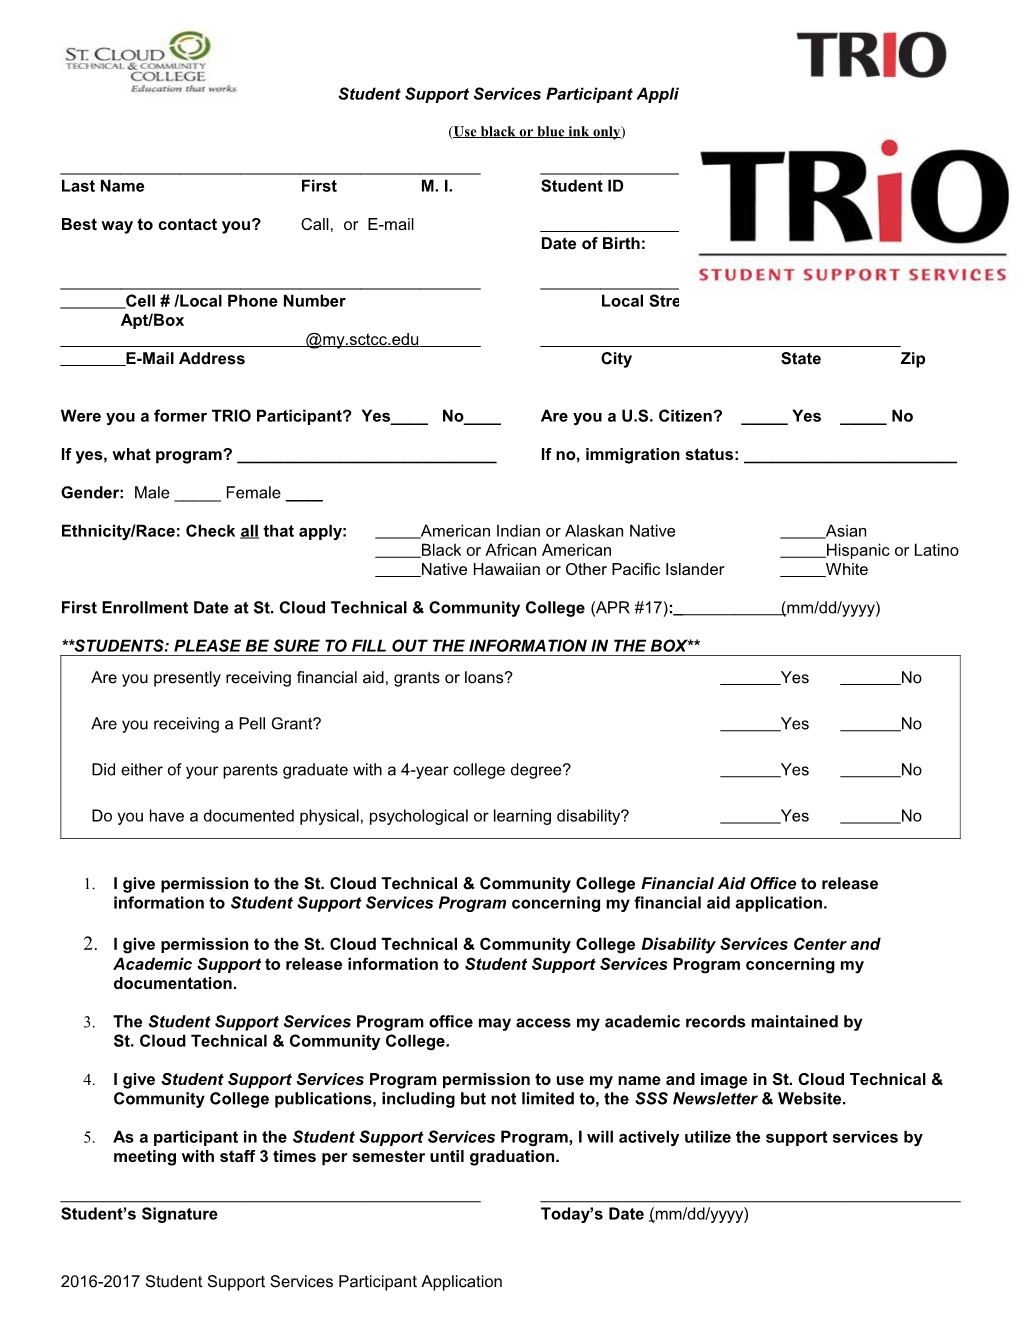 Student Support Services Participant Application